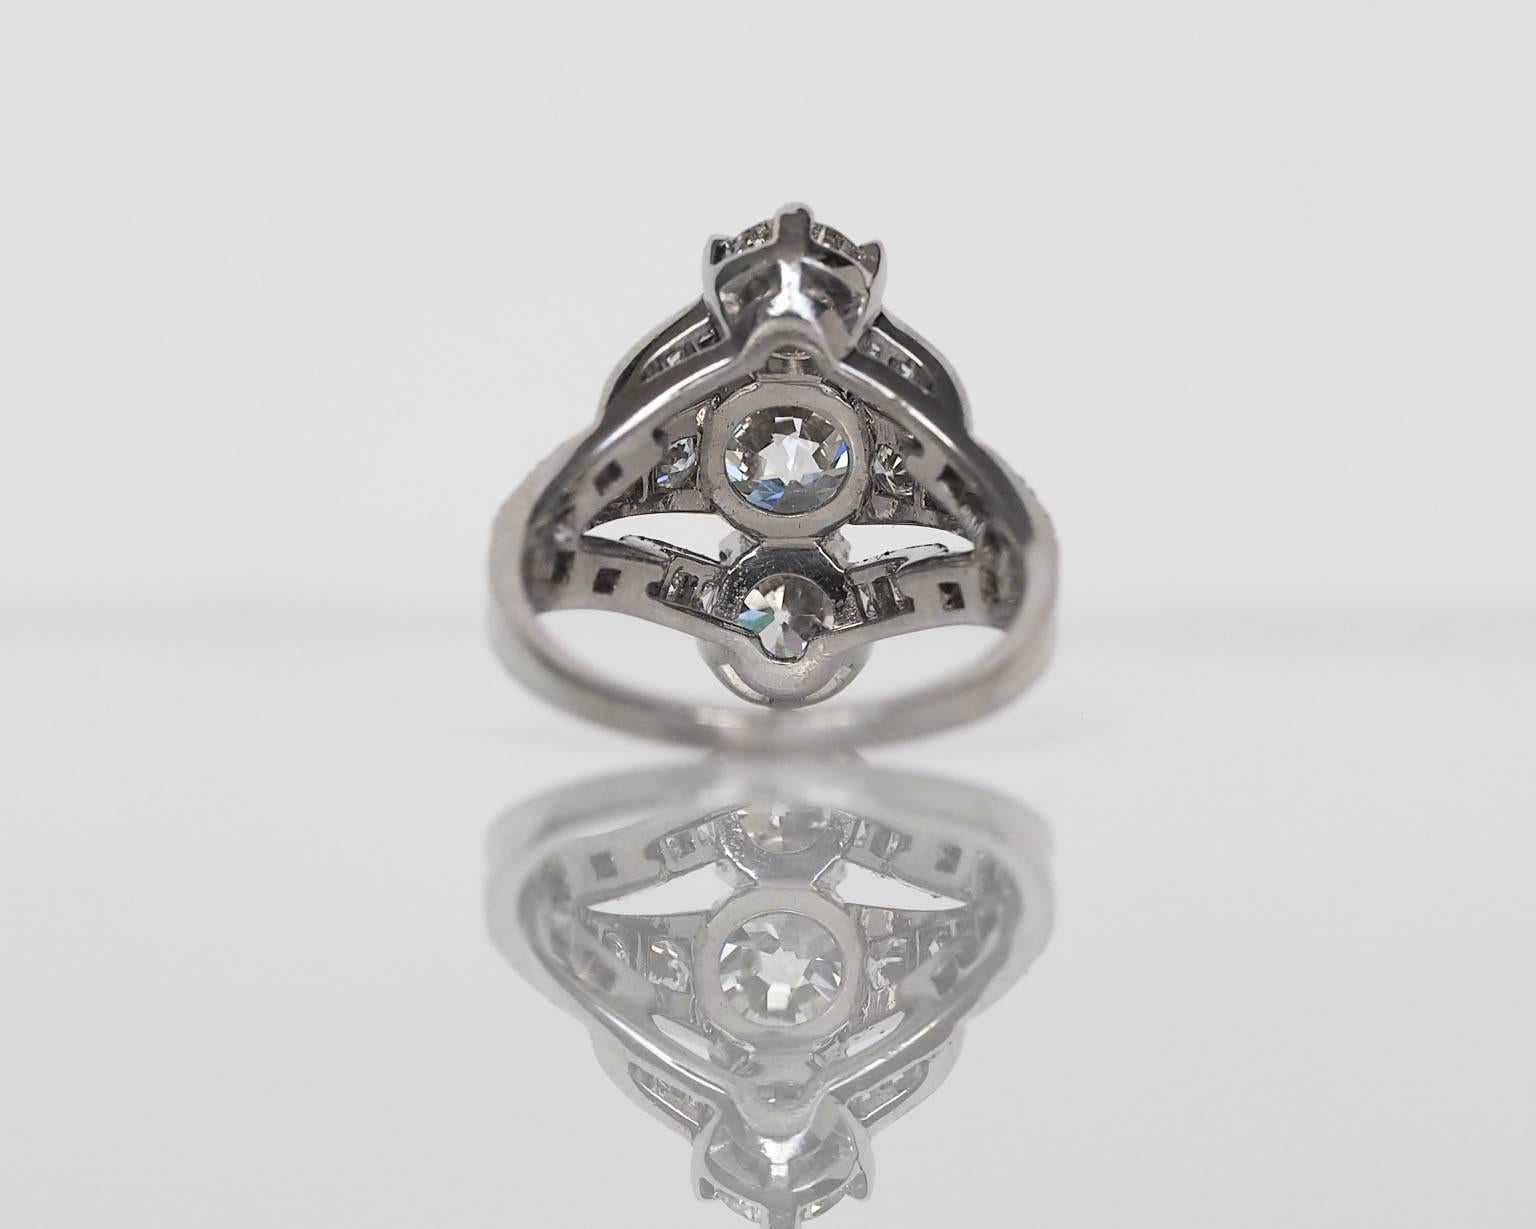 1920s Tiffany and Co. Art Deco Diamond Platinum Engagement Ring at ...